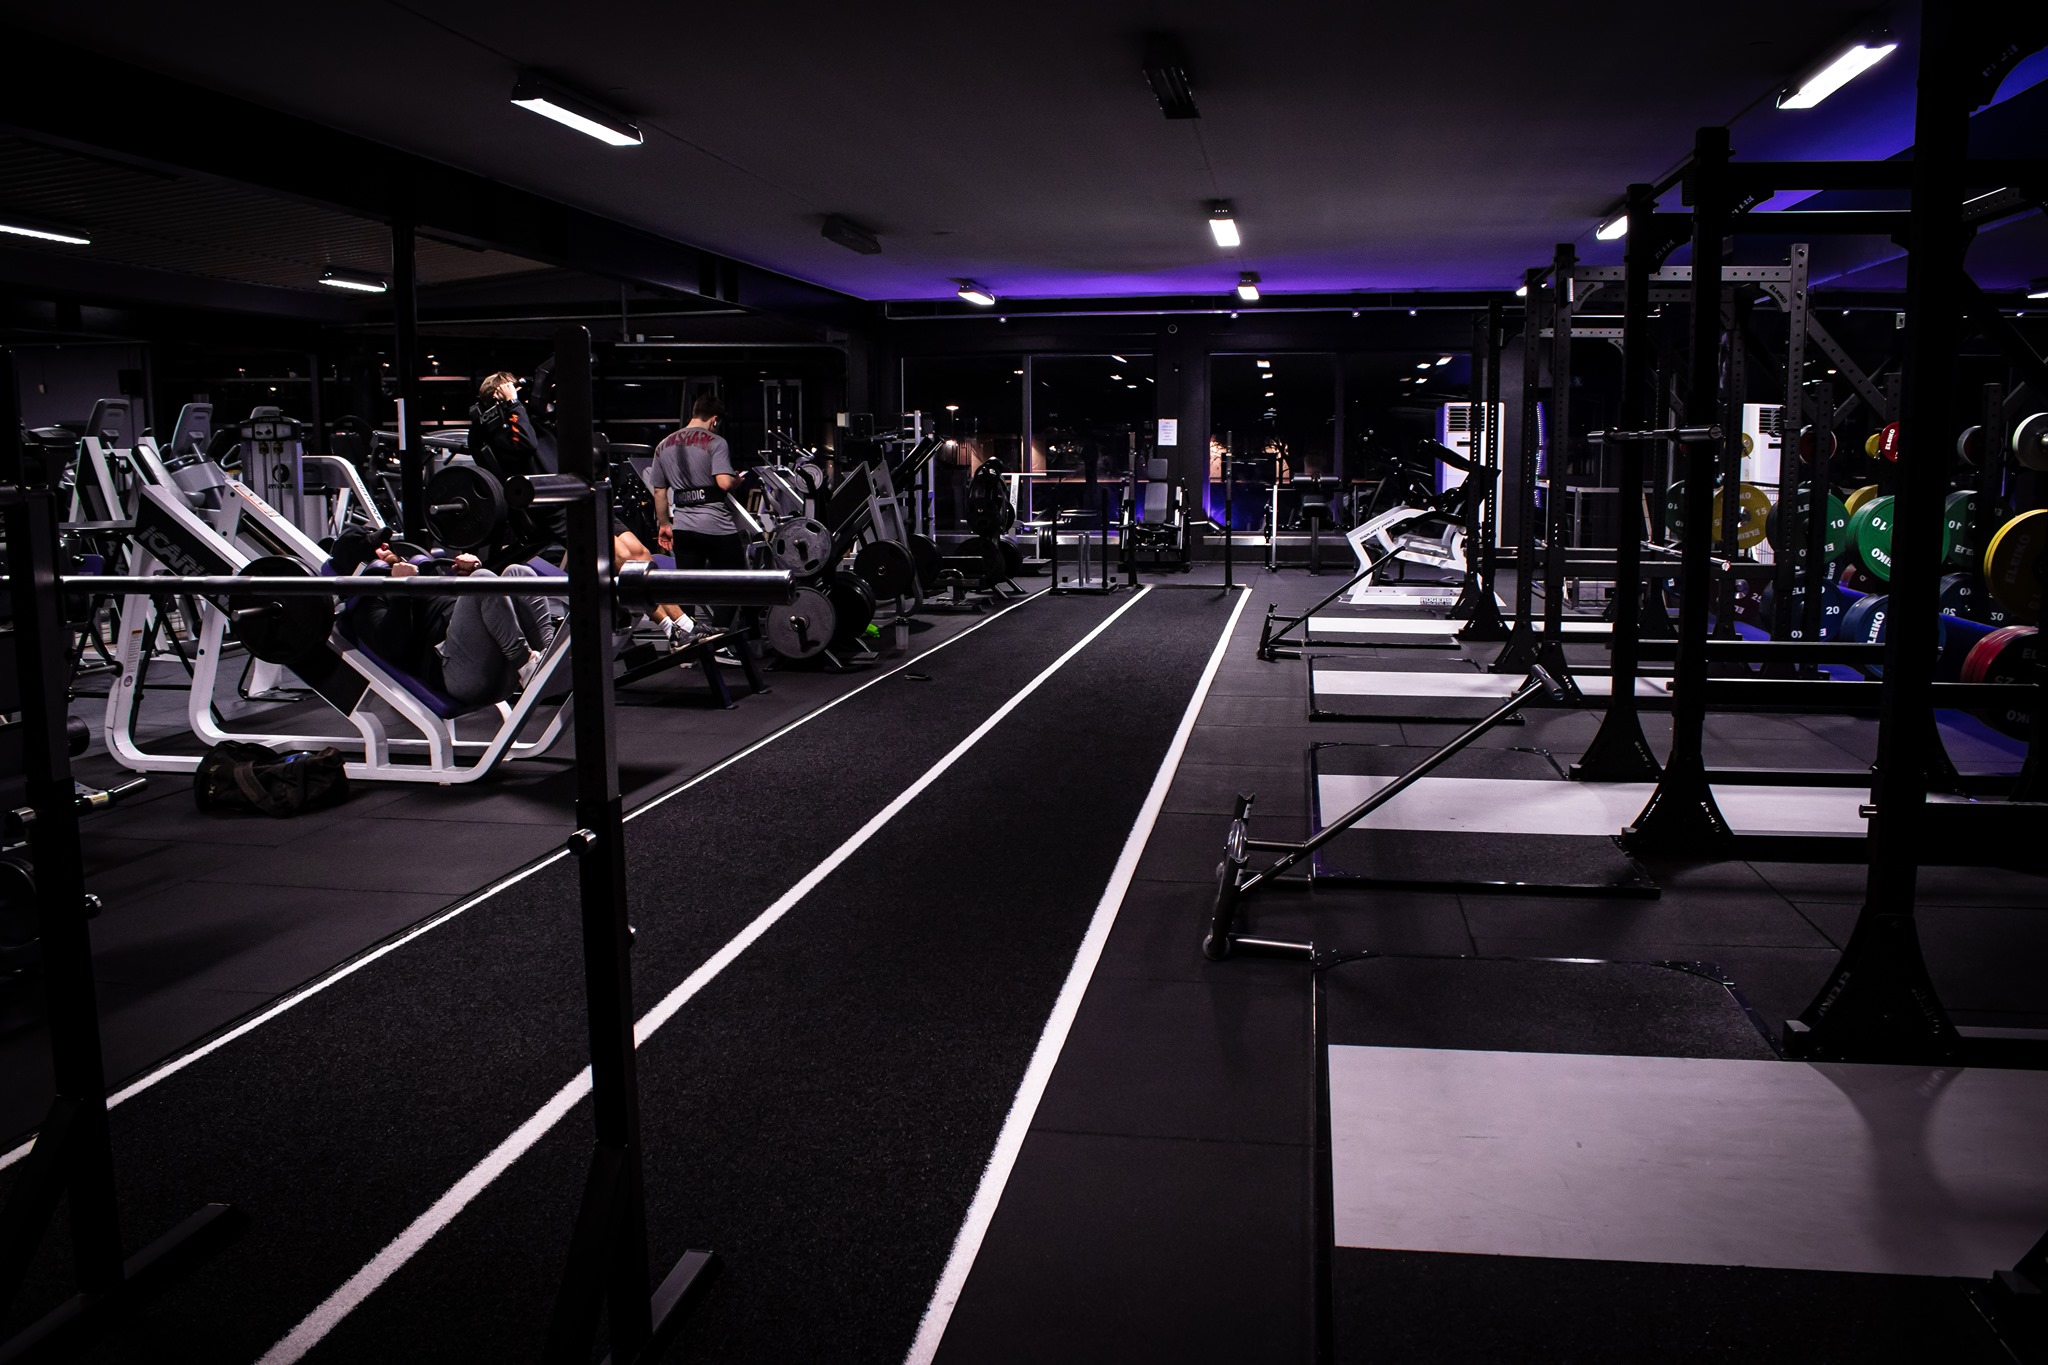 An image showing an overview of Gladius' gym, with people working out, it's dark outside and reflects purple lights in the background.